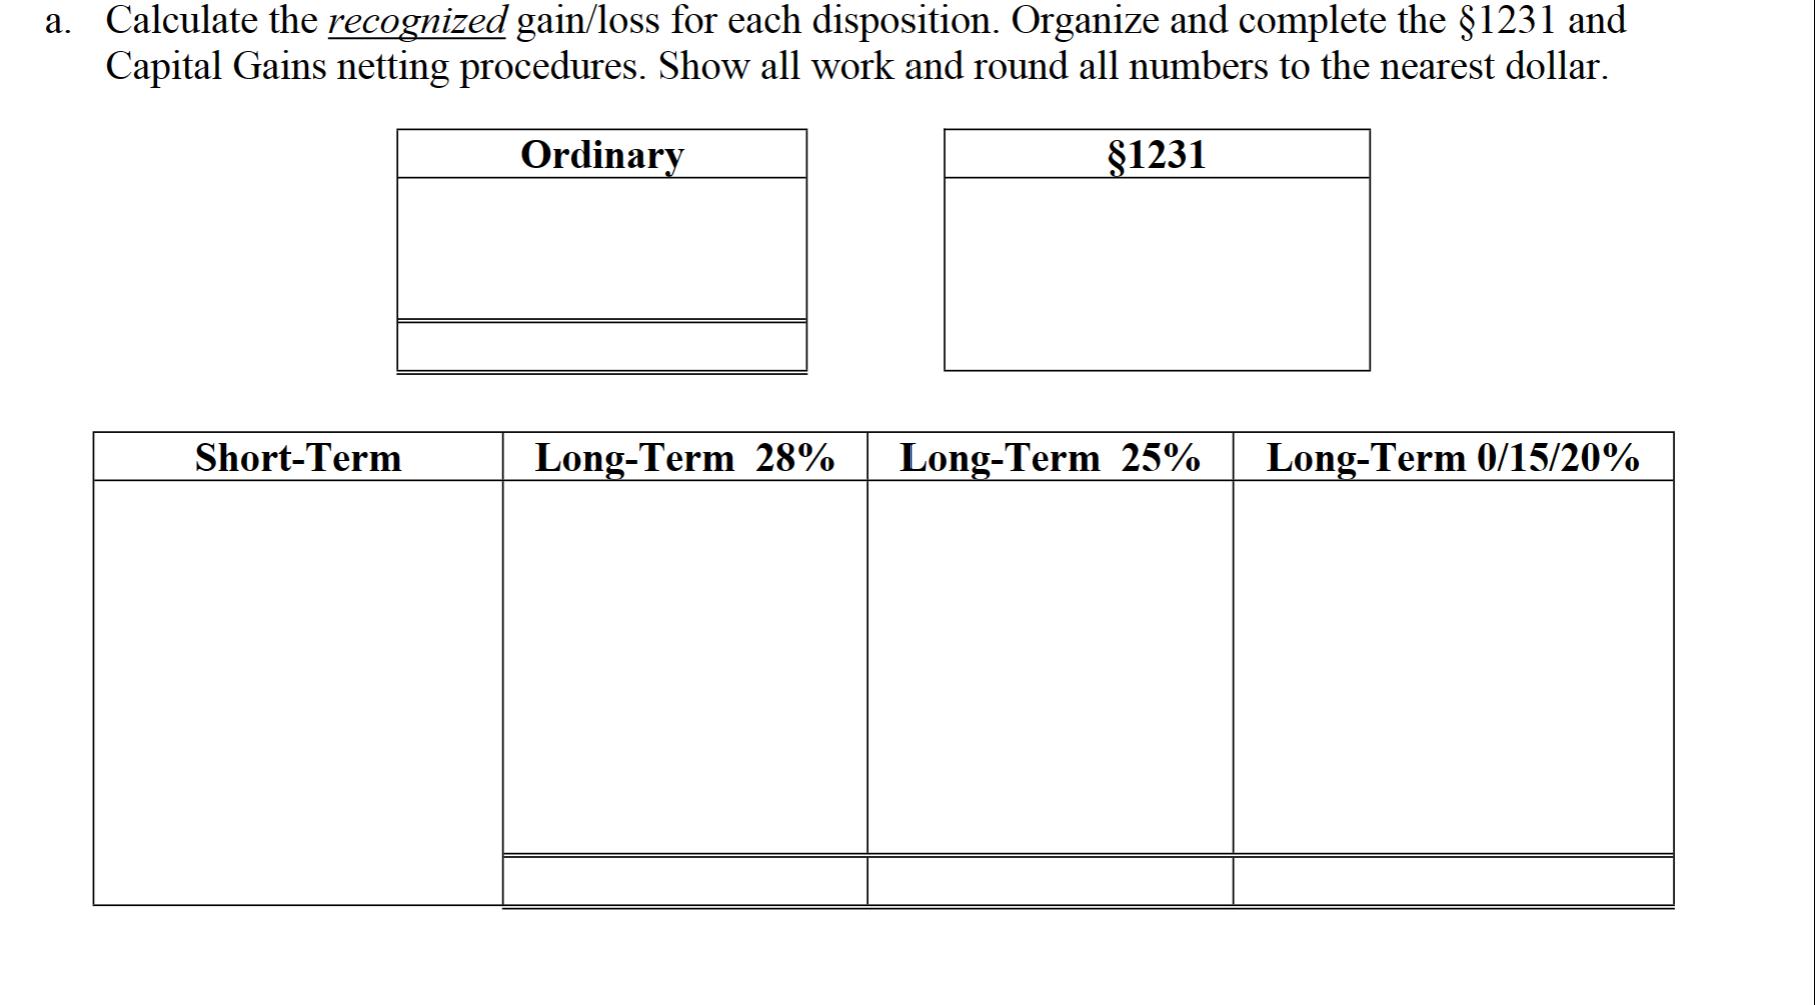 a. Calculate the recognized gain/loss for each disposition. Organize and complete the 1231 and Capital Gains